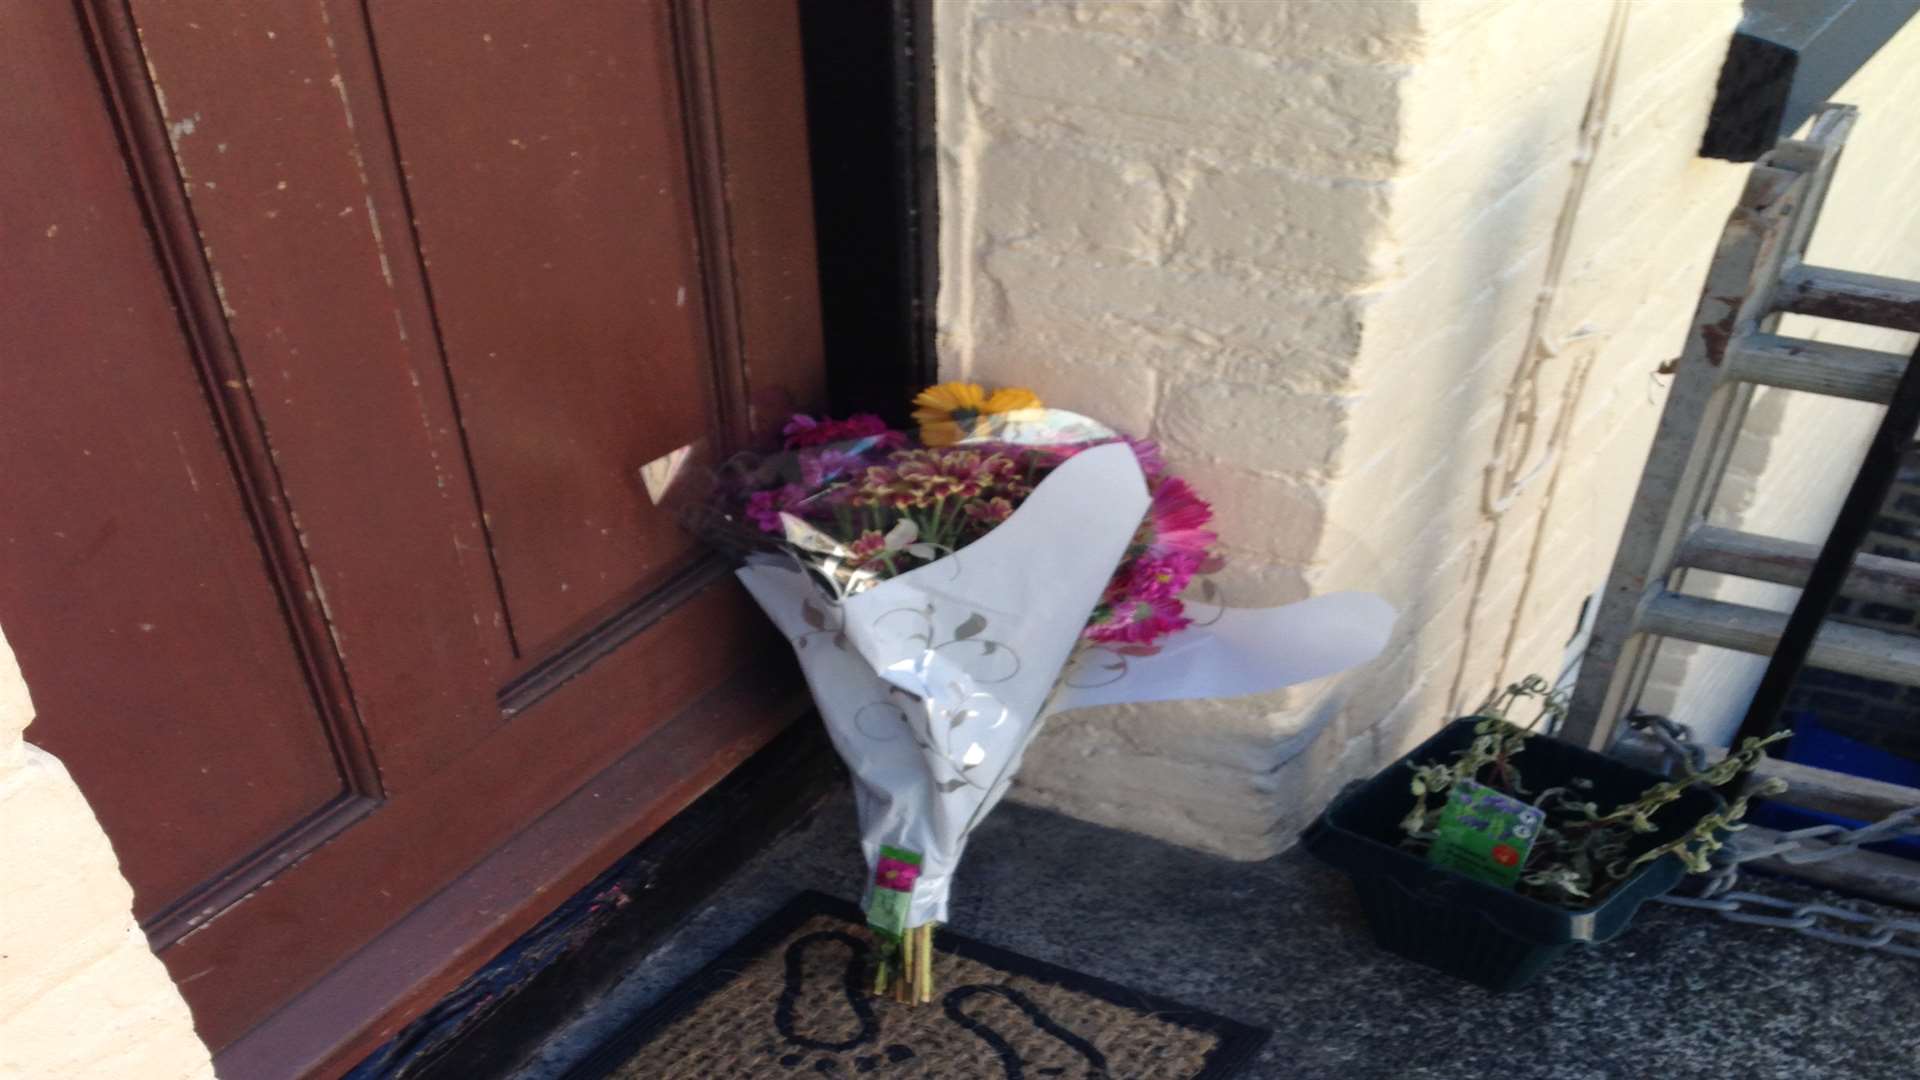 Floral tributes were left out side a house in De Burgh Street, Dover